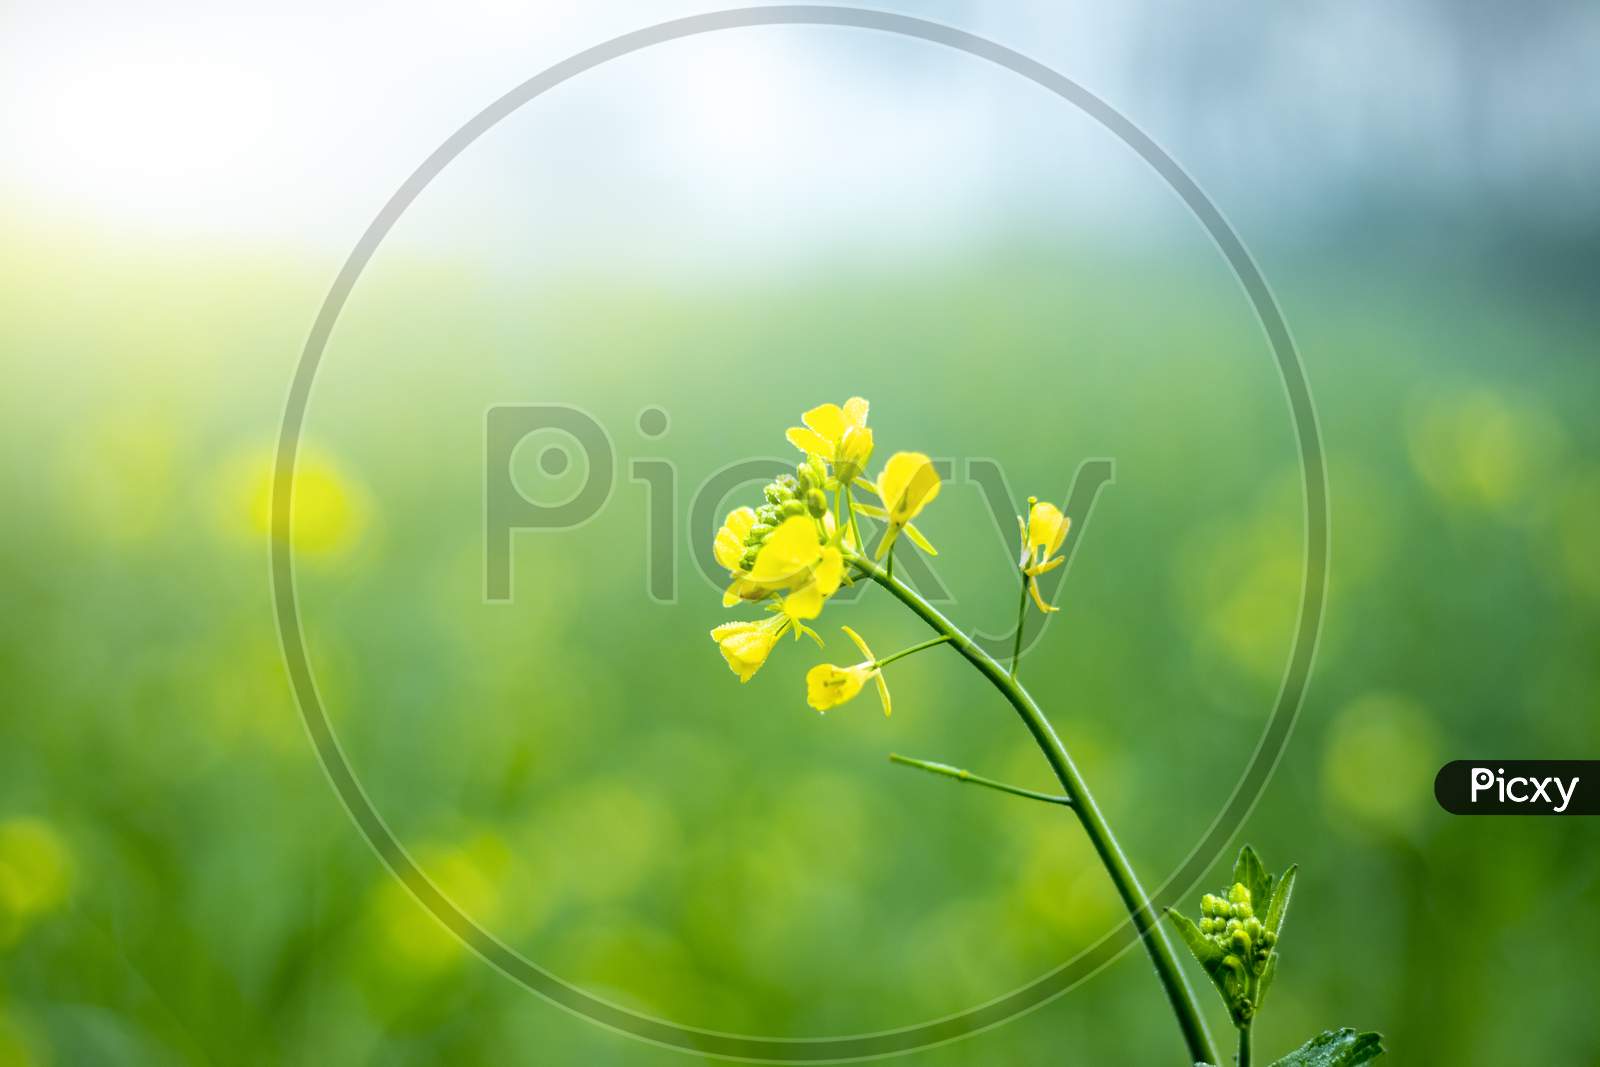 The Yellow Ripe Mustered Flowers With Plant Growing Together In Farm